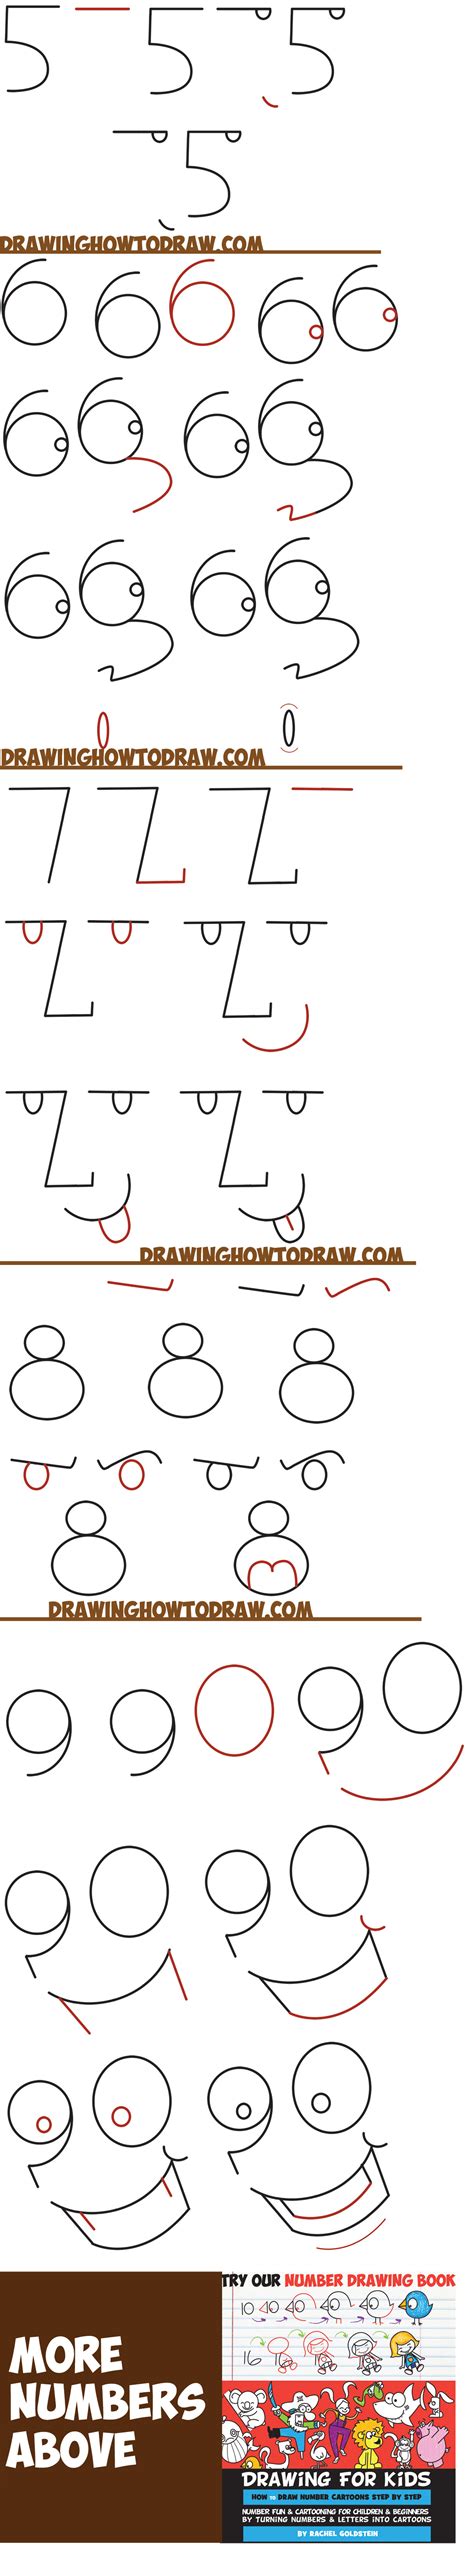 How To Draw Cartoon Faces From Numbers 1 9 Easy Step By Step Drawing